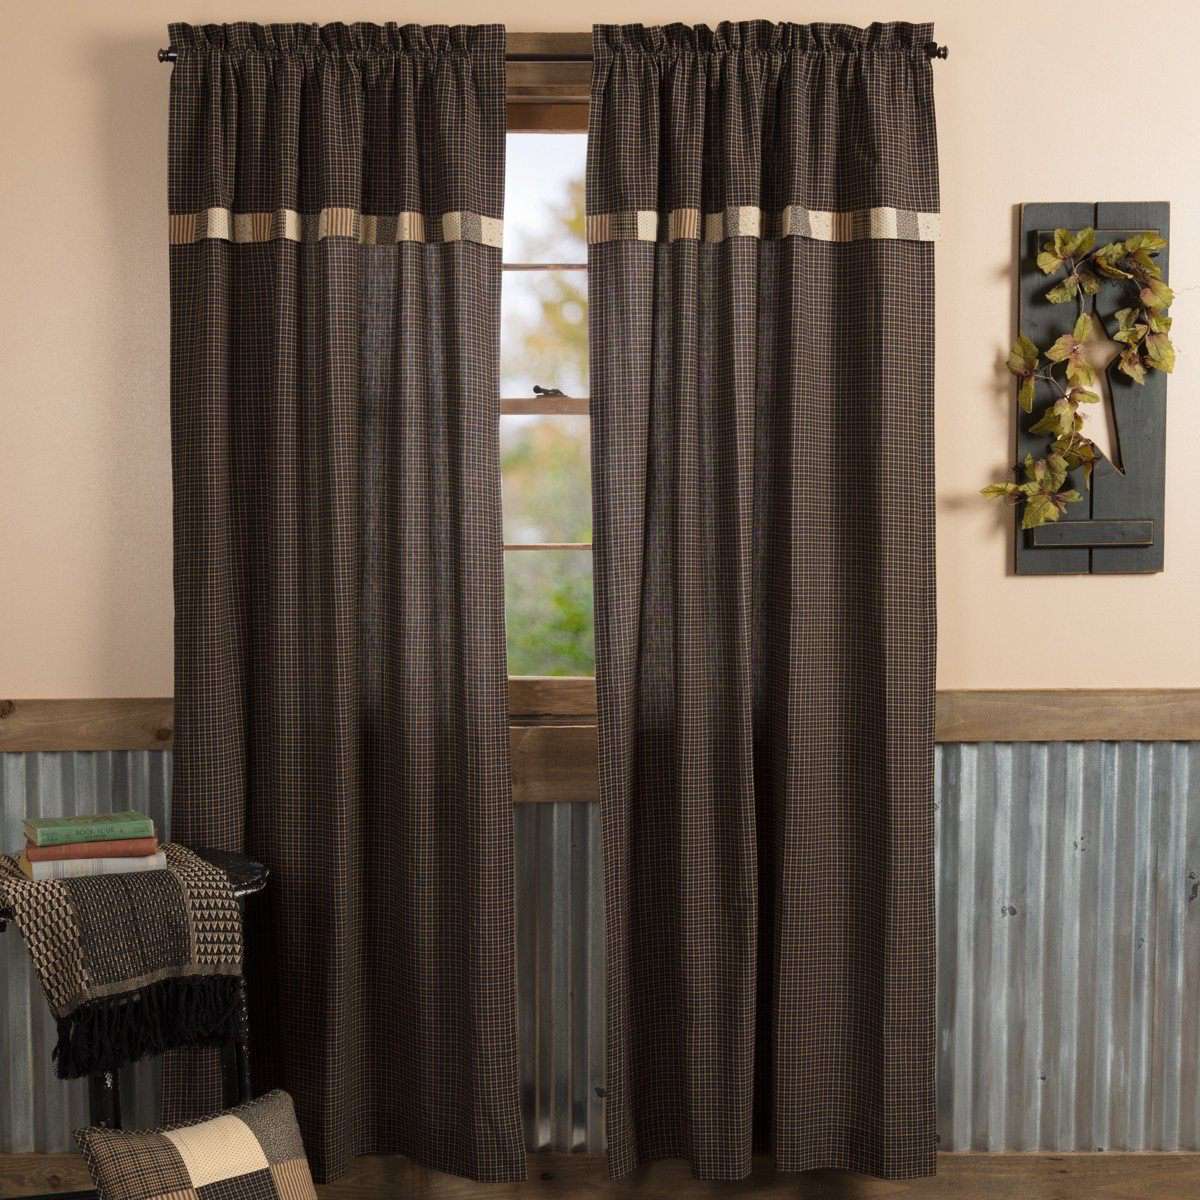 Kettle Grove Panel Curtain with Attached Valance Block Border Set of 2 84"x40" - The Fox Decor